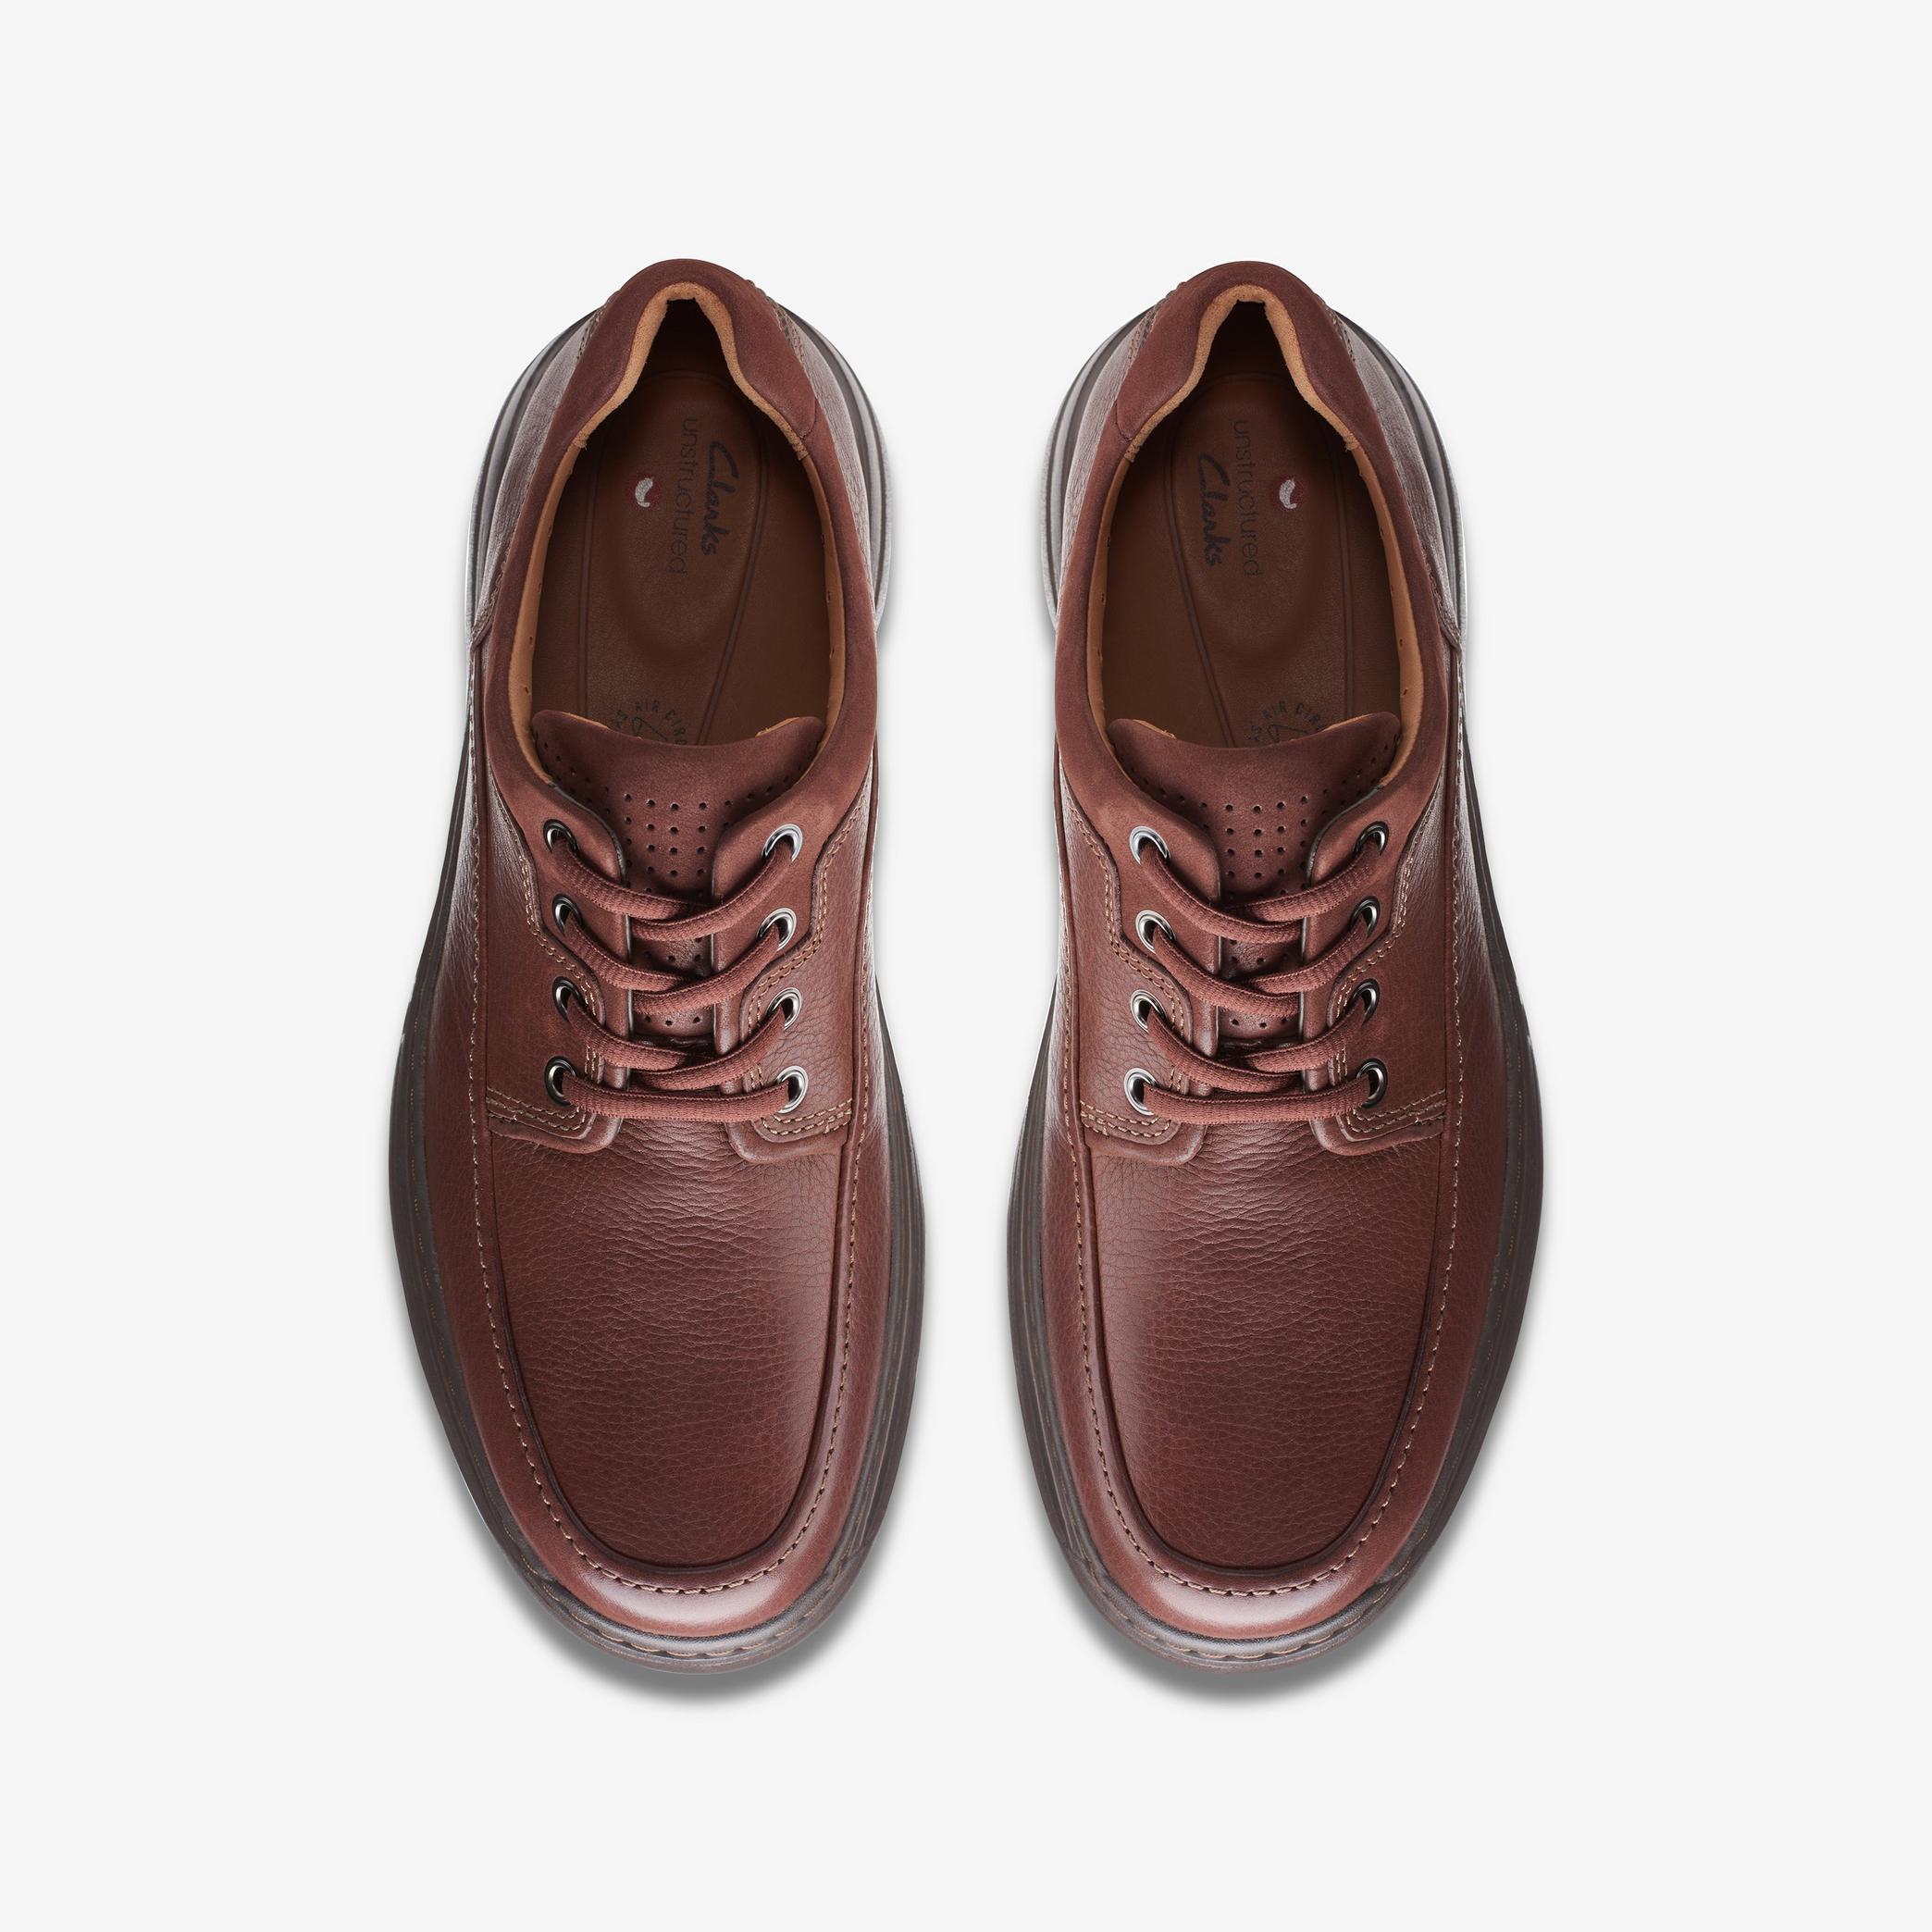 MENS Un Brawley Lace Mahogany Leather Oxford Shoes | Clarks US